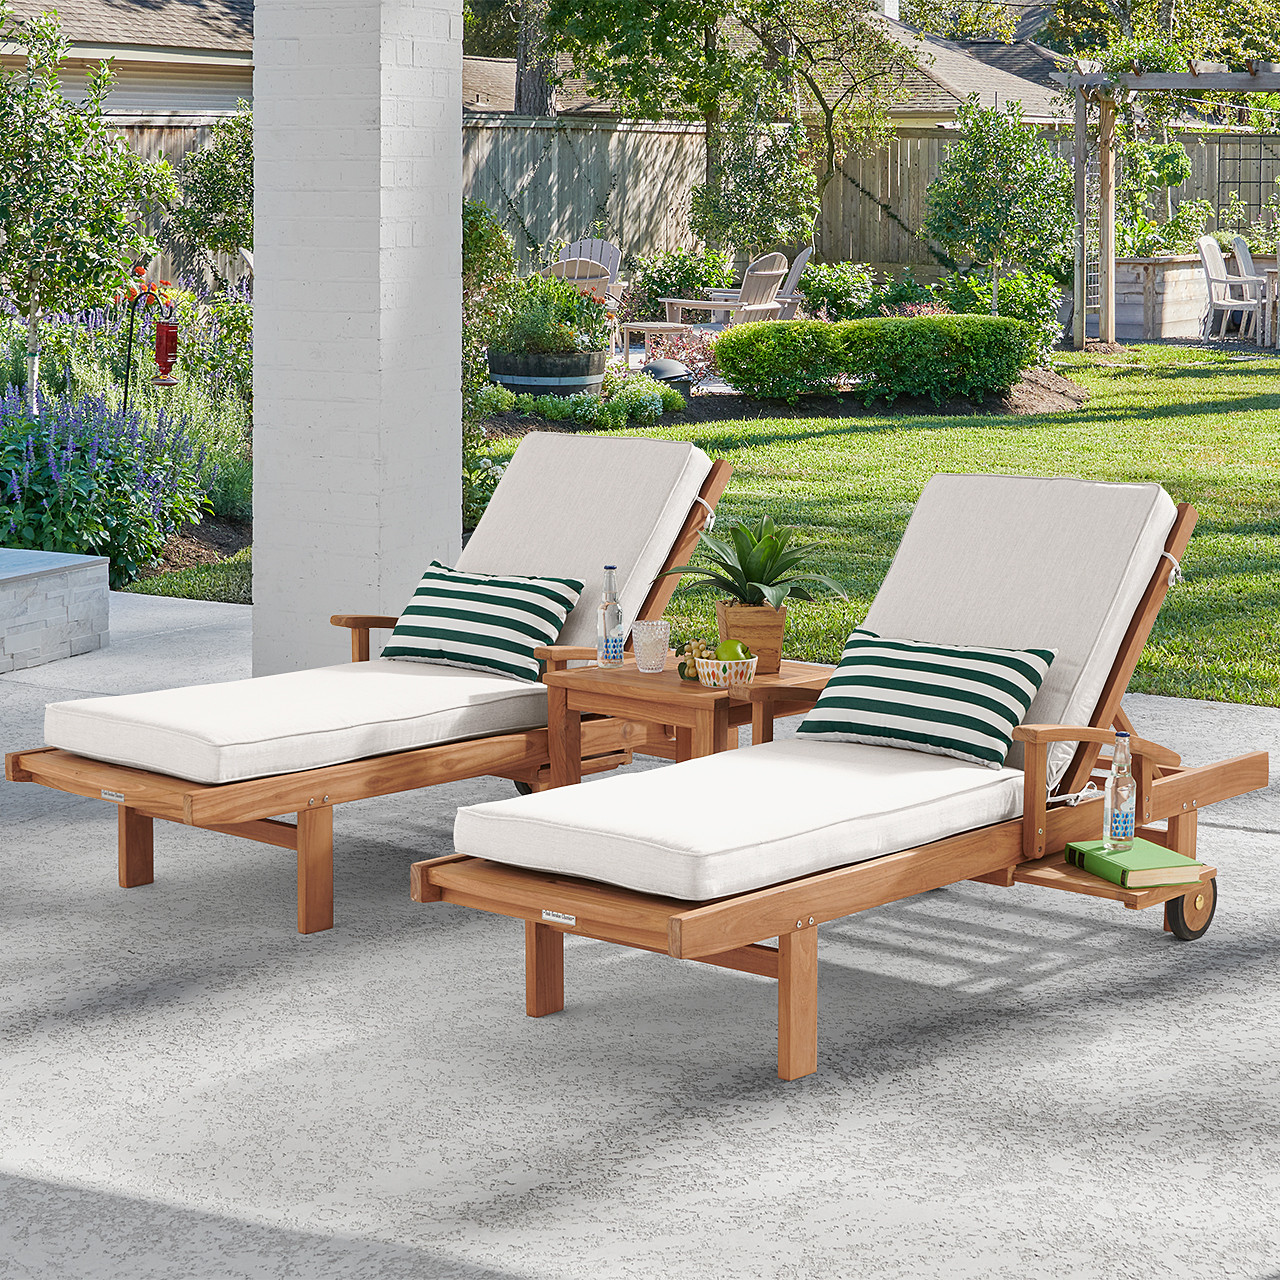 Eastchester Natural Stain Solid Teak With Cushions 3 Piece Chaise Lounge Set + 20 in. sq. Side Table